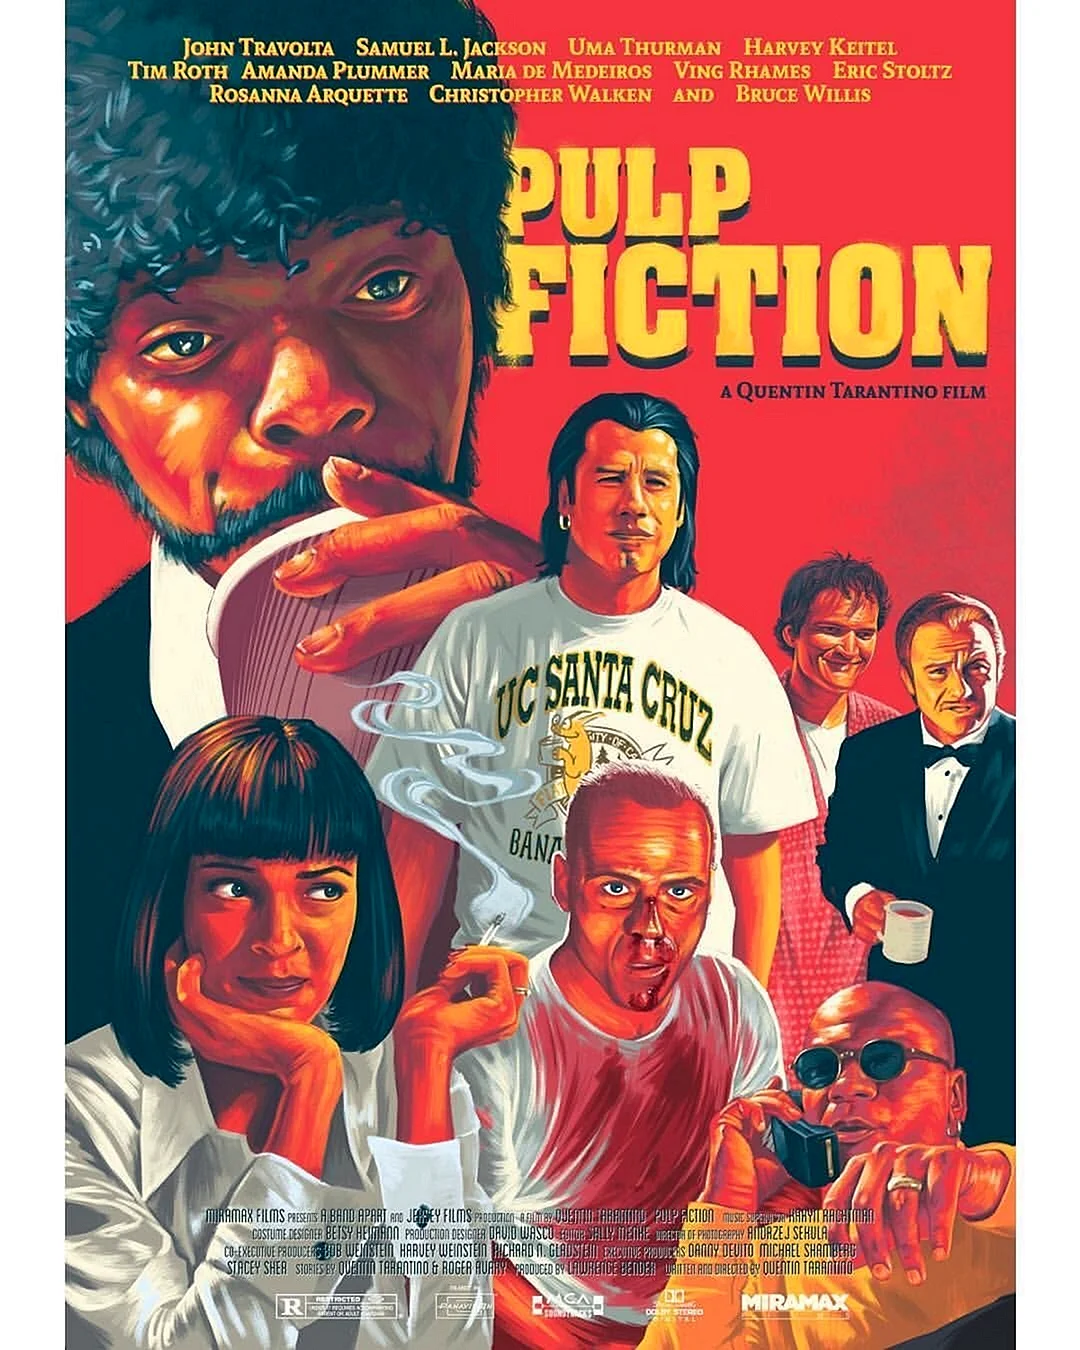 Pulp Fiction 1994 Wallpaper For iPhone